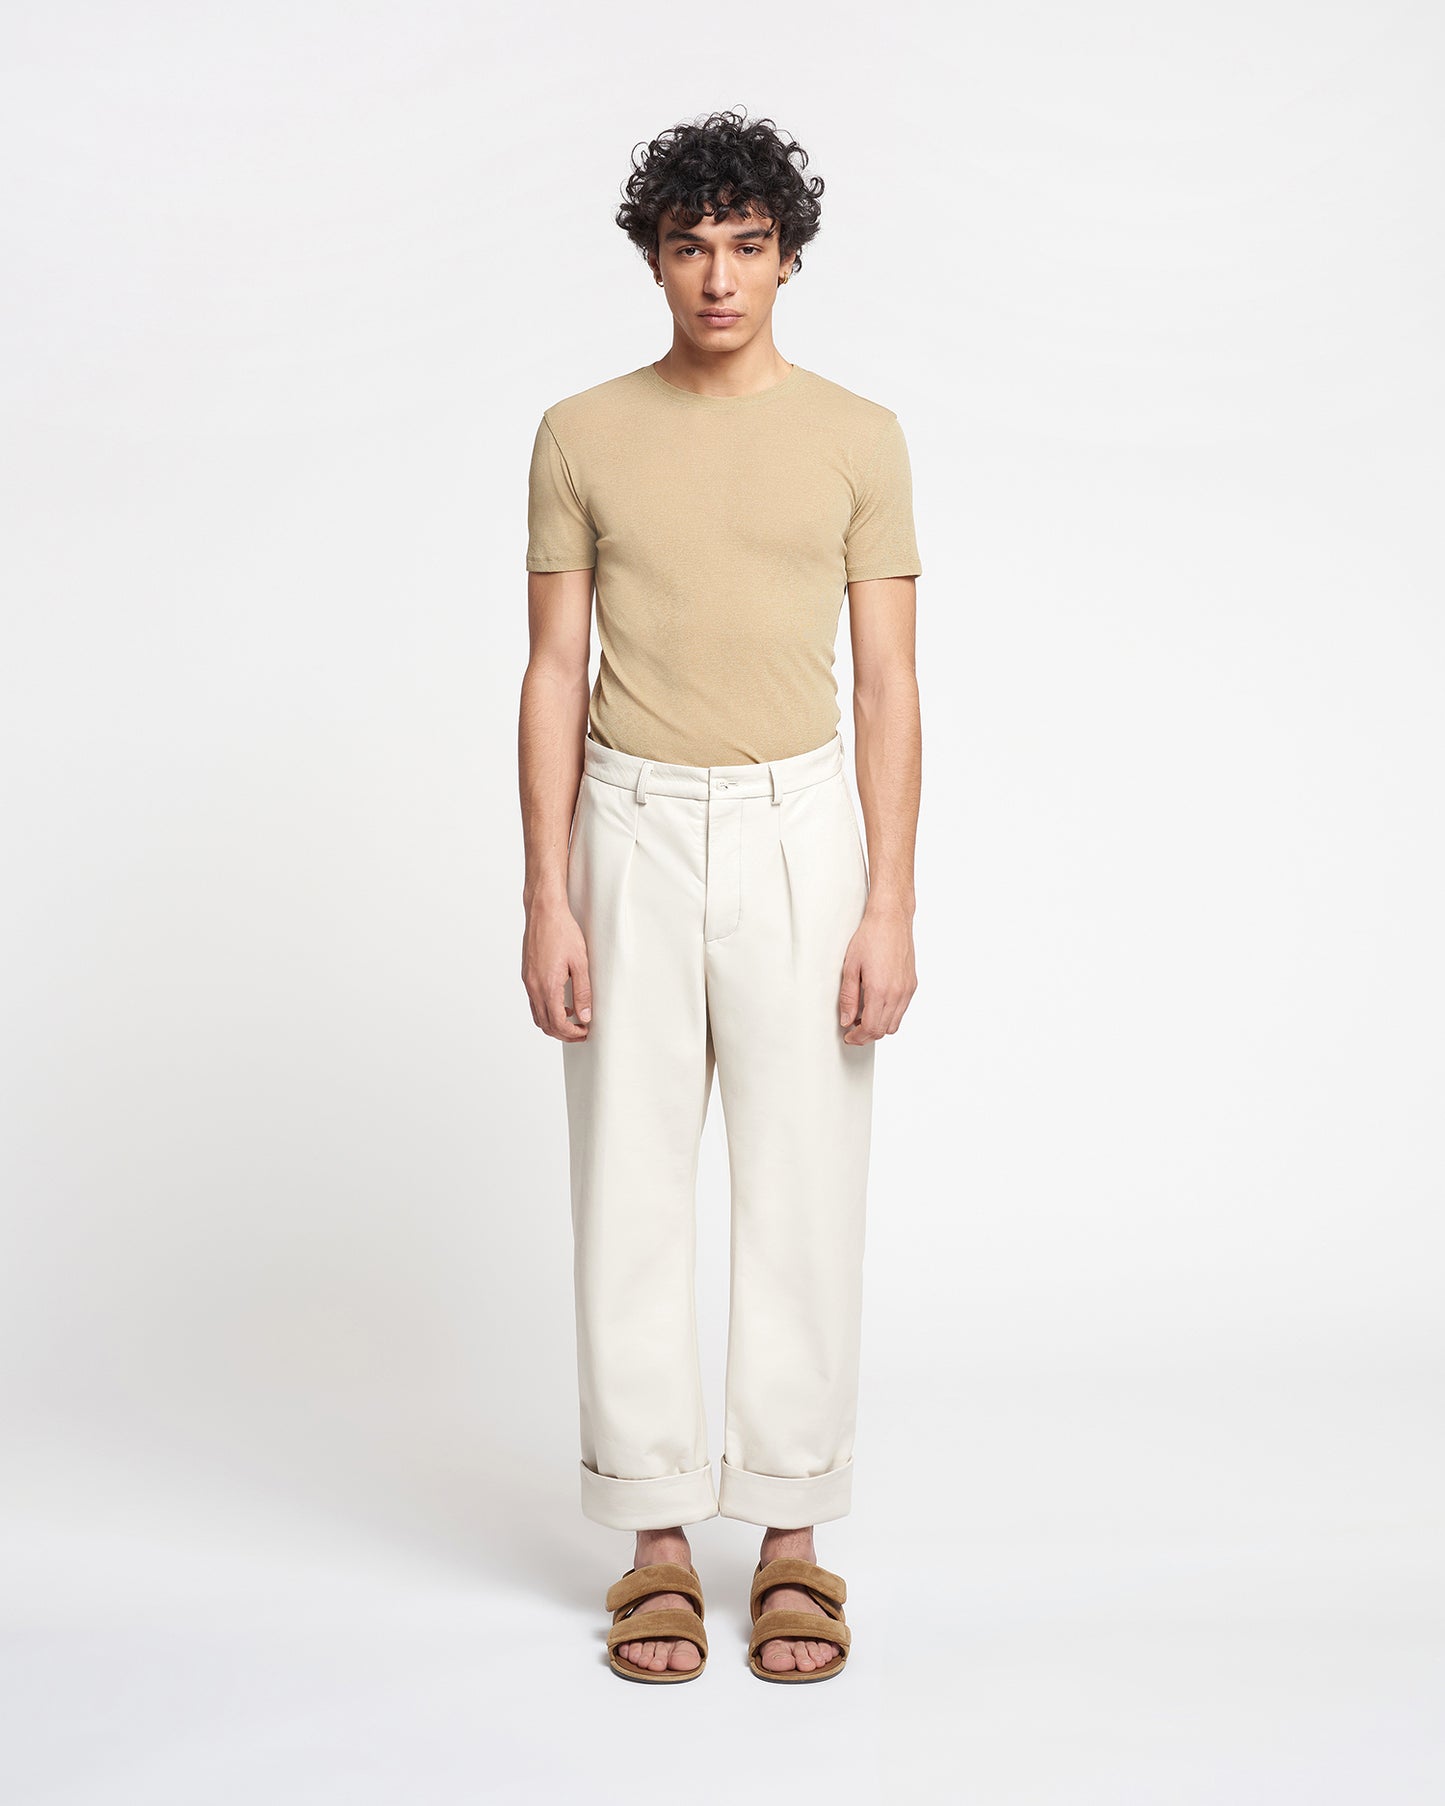 Zayden - Regenerated Leather Tapered Pants - Crayon